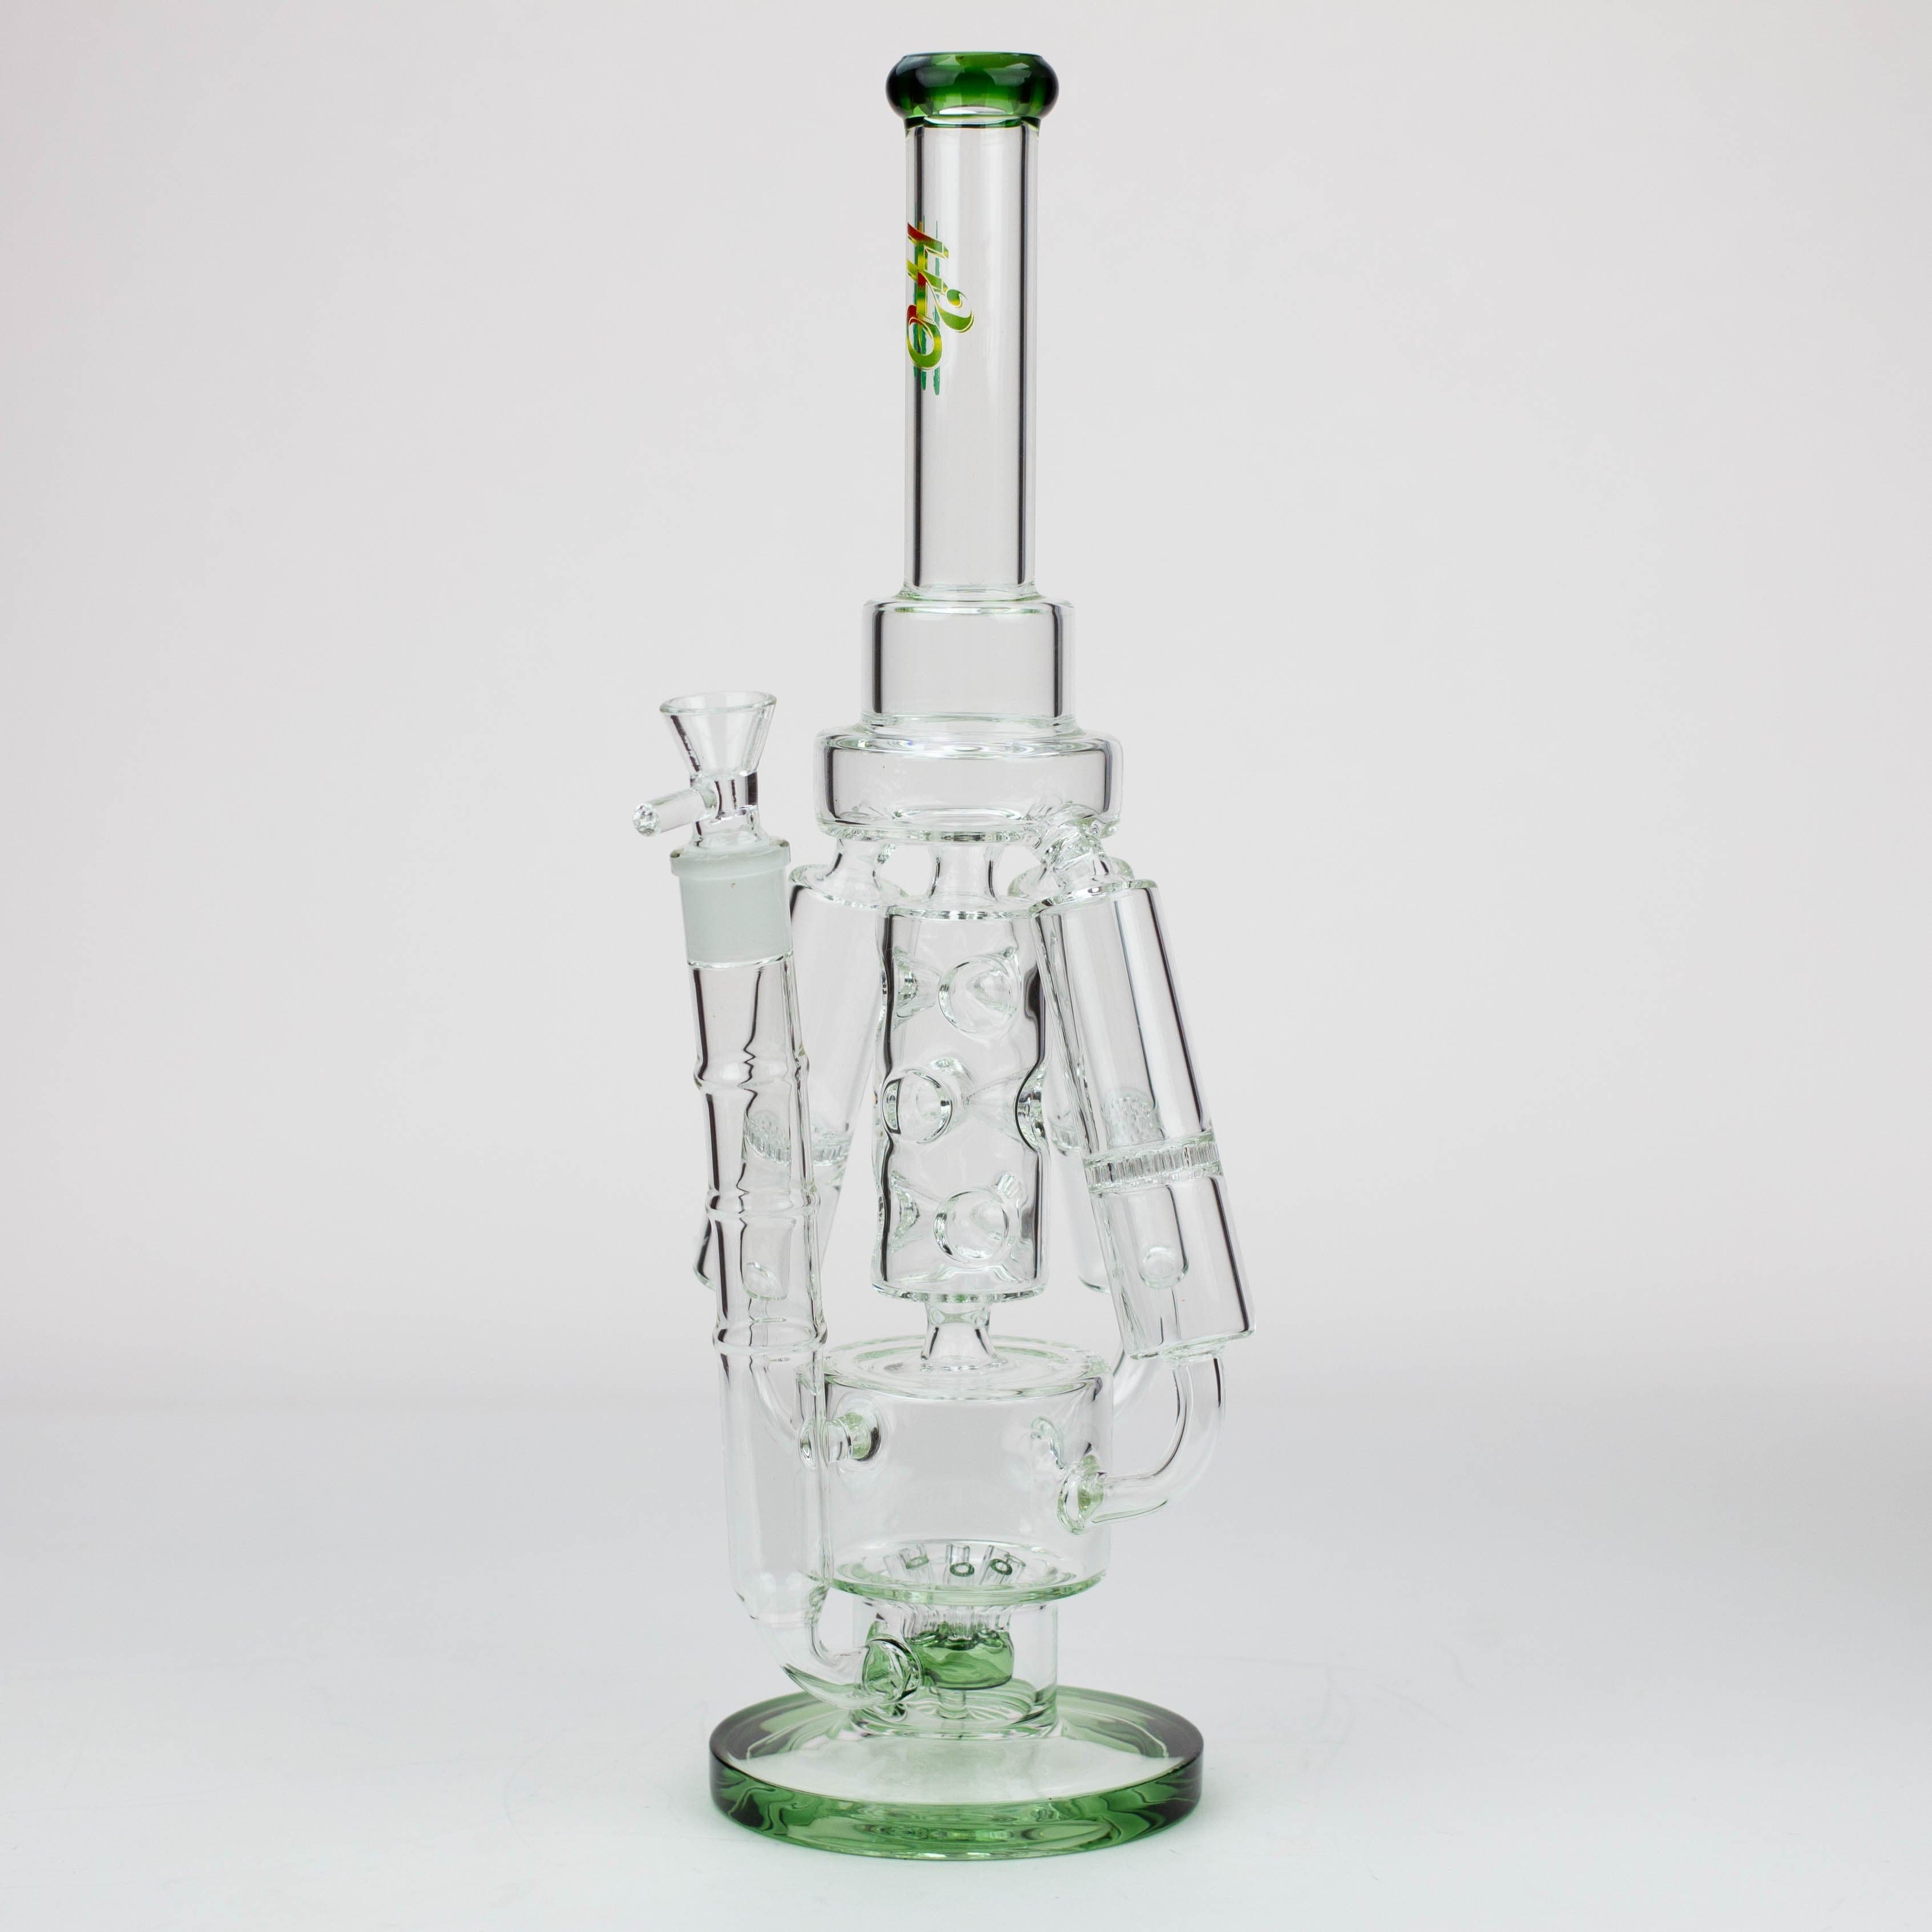 H2O Three Honeycomb silnders glass water recycle pipes 17"_4